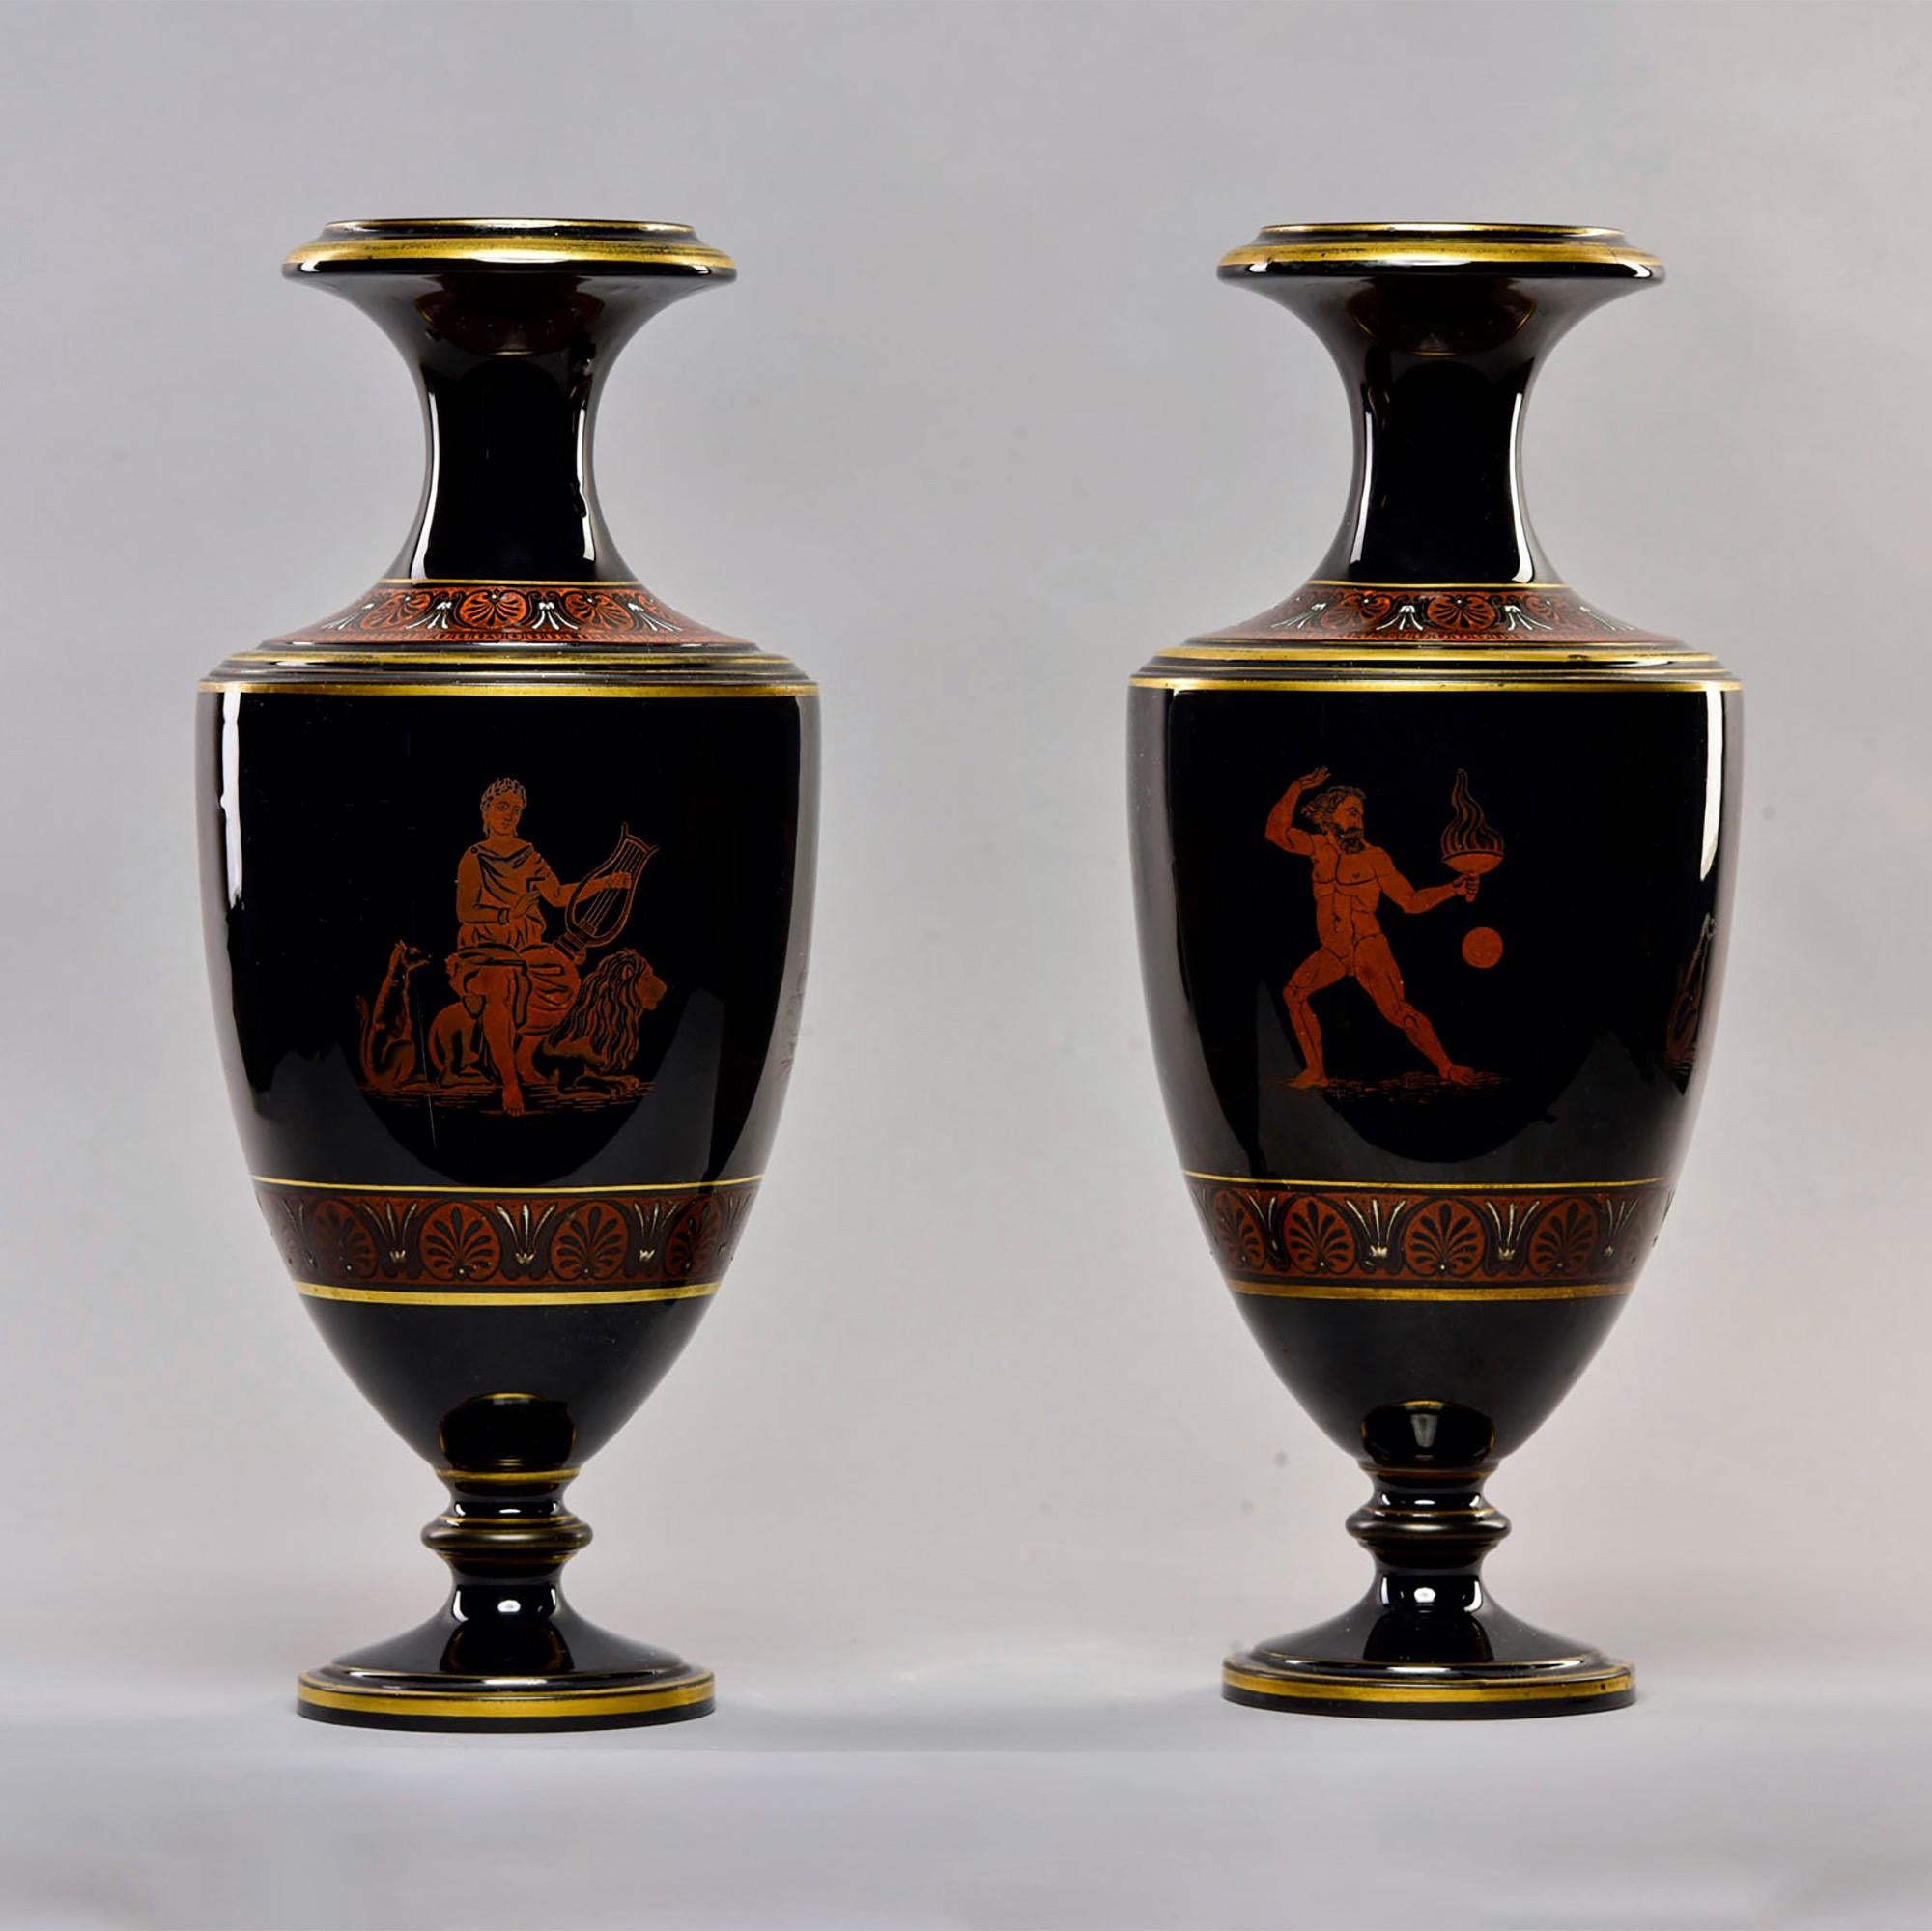 Found in England, this pair of tall black porcelain vases dates from approximately 1880s. Decorated with gilt and classical Greek or Roman figures. Unknown maker. Very good antique condition. Sold and priced as a pair.